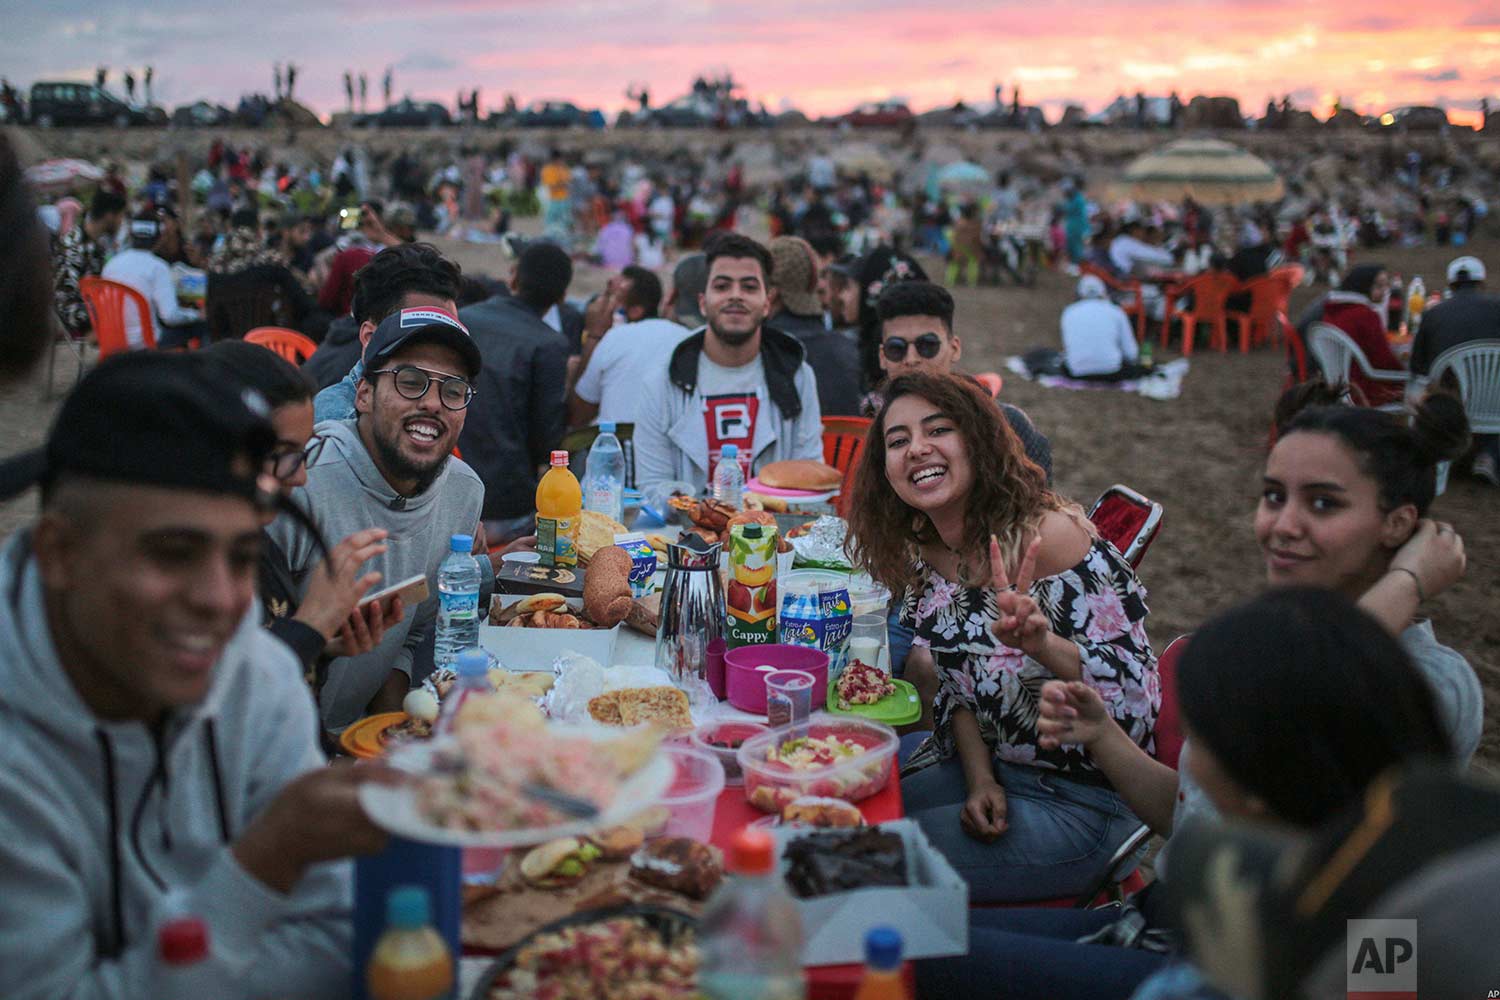  Friends pose for a photo as they prepare to break their fast on the beach in the holy month of Ramadan, on Rabat beach, Morocco, Saturday, June 9, 2018. (AP Photo/Mosa'ab Elshamy) 